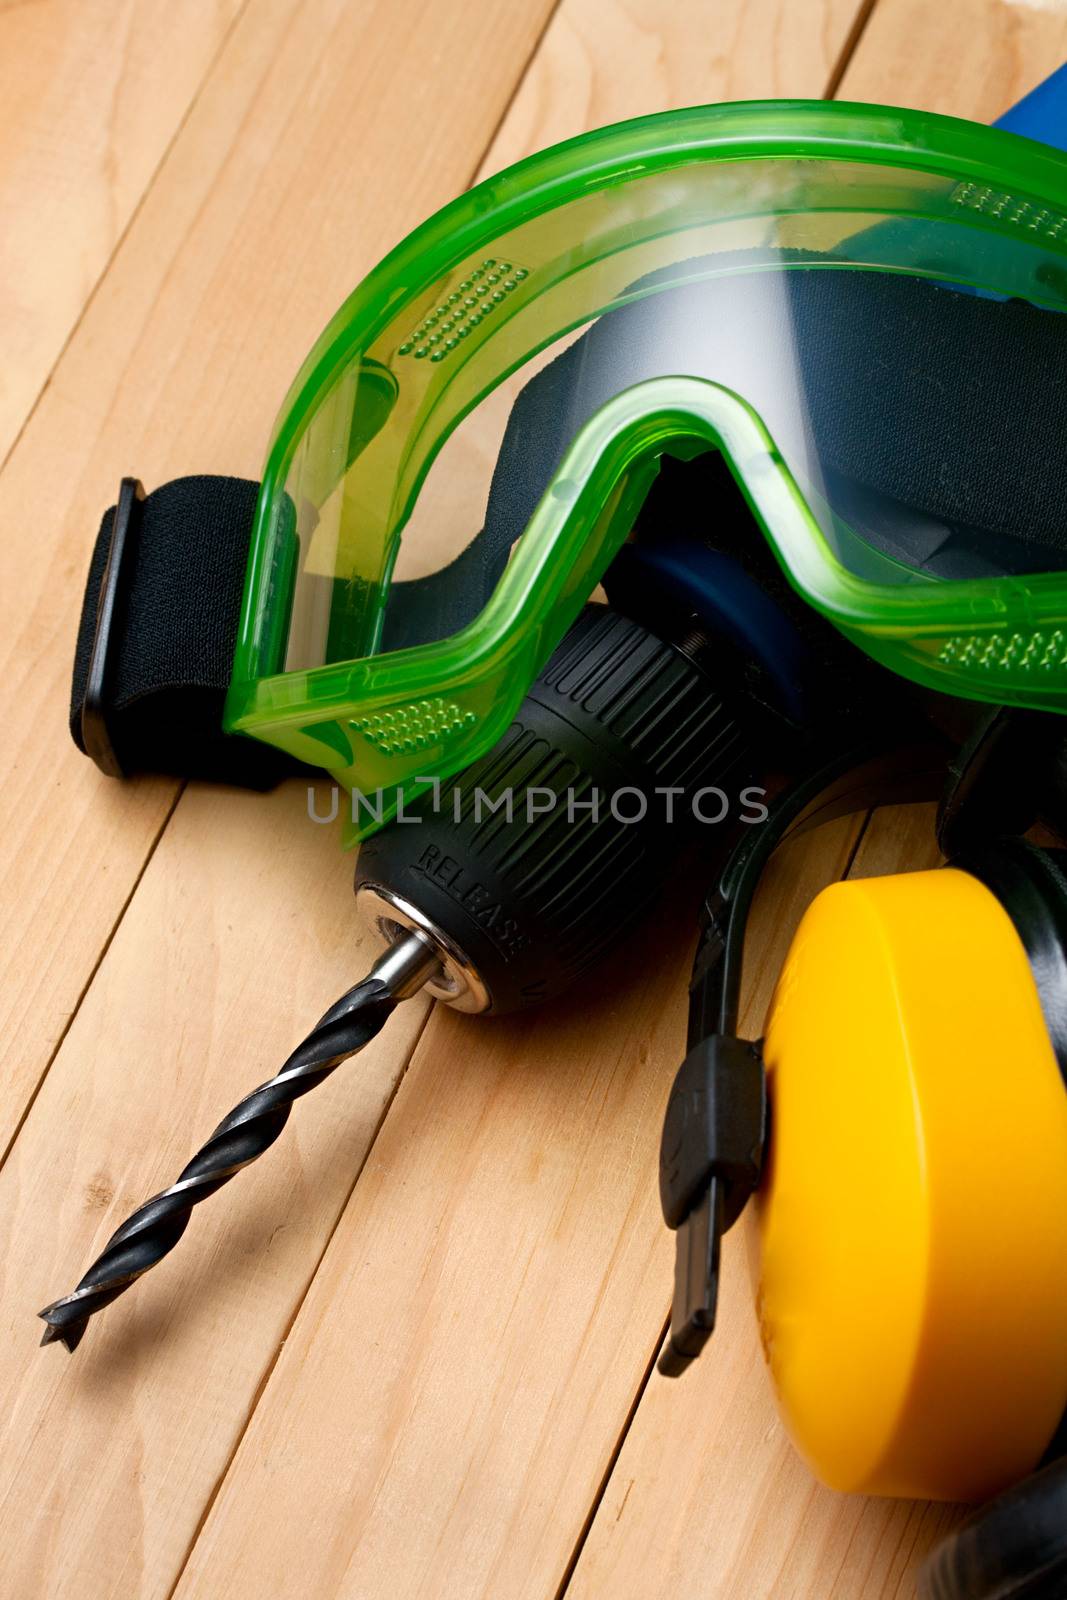 Handdrill, earphones and goggles